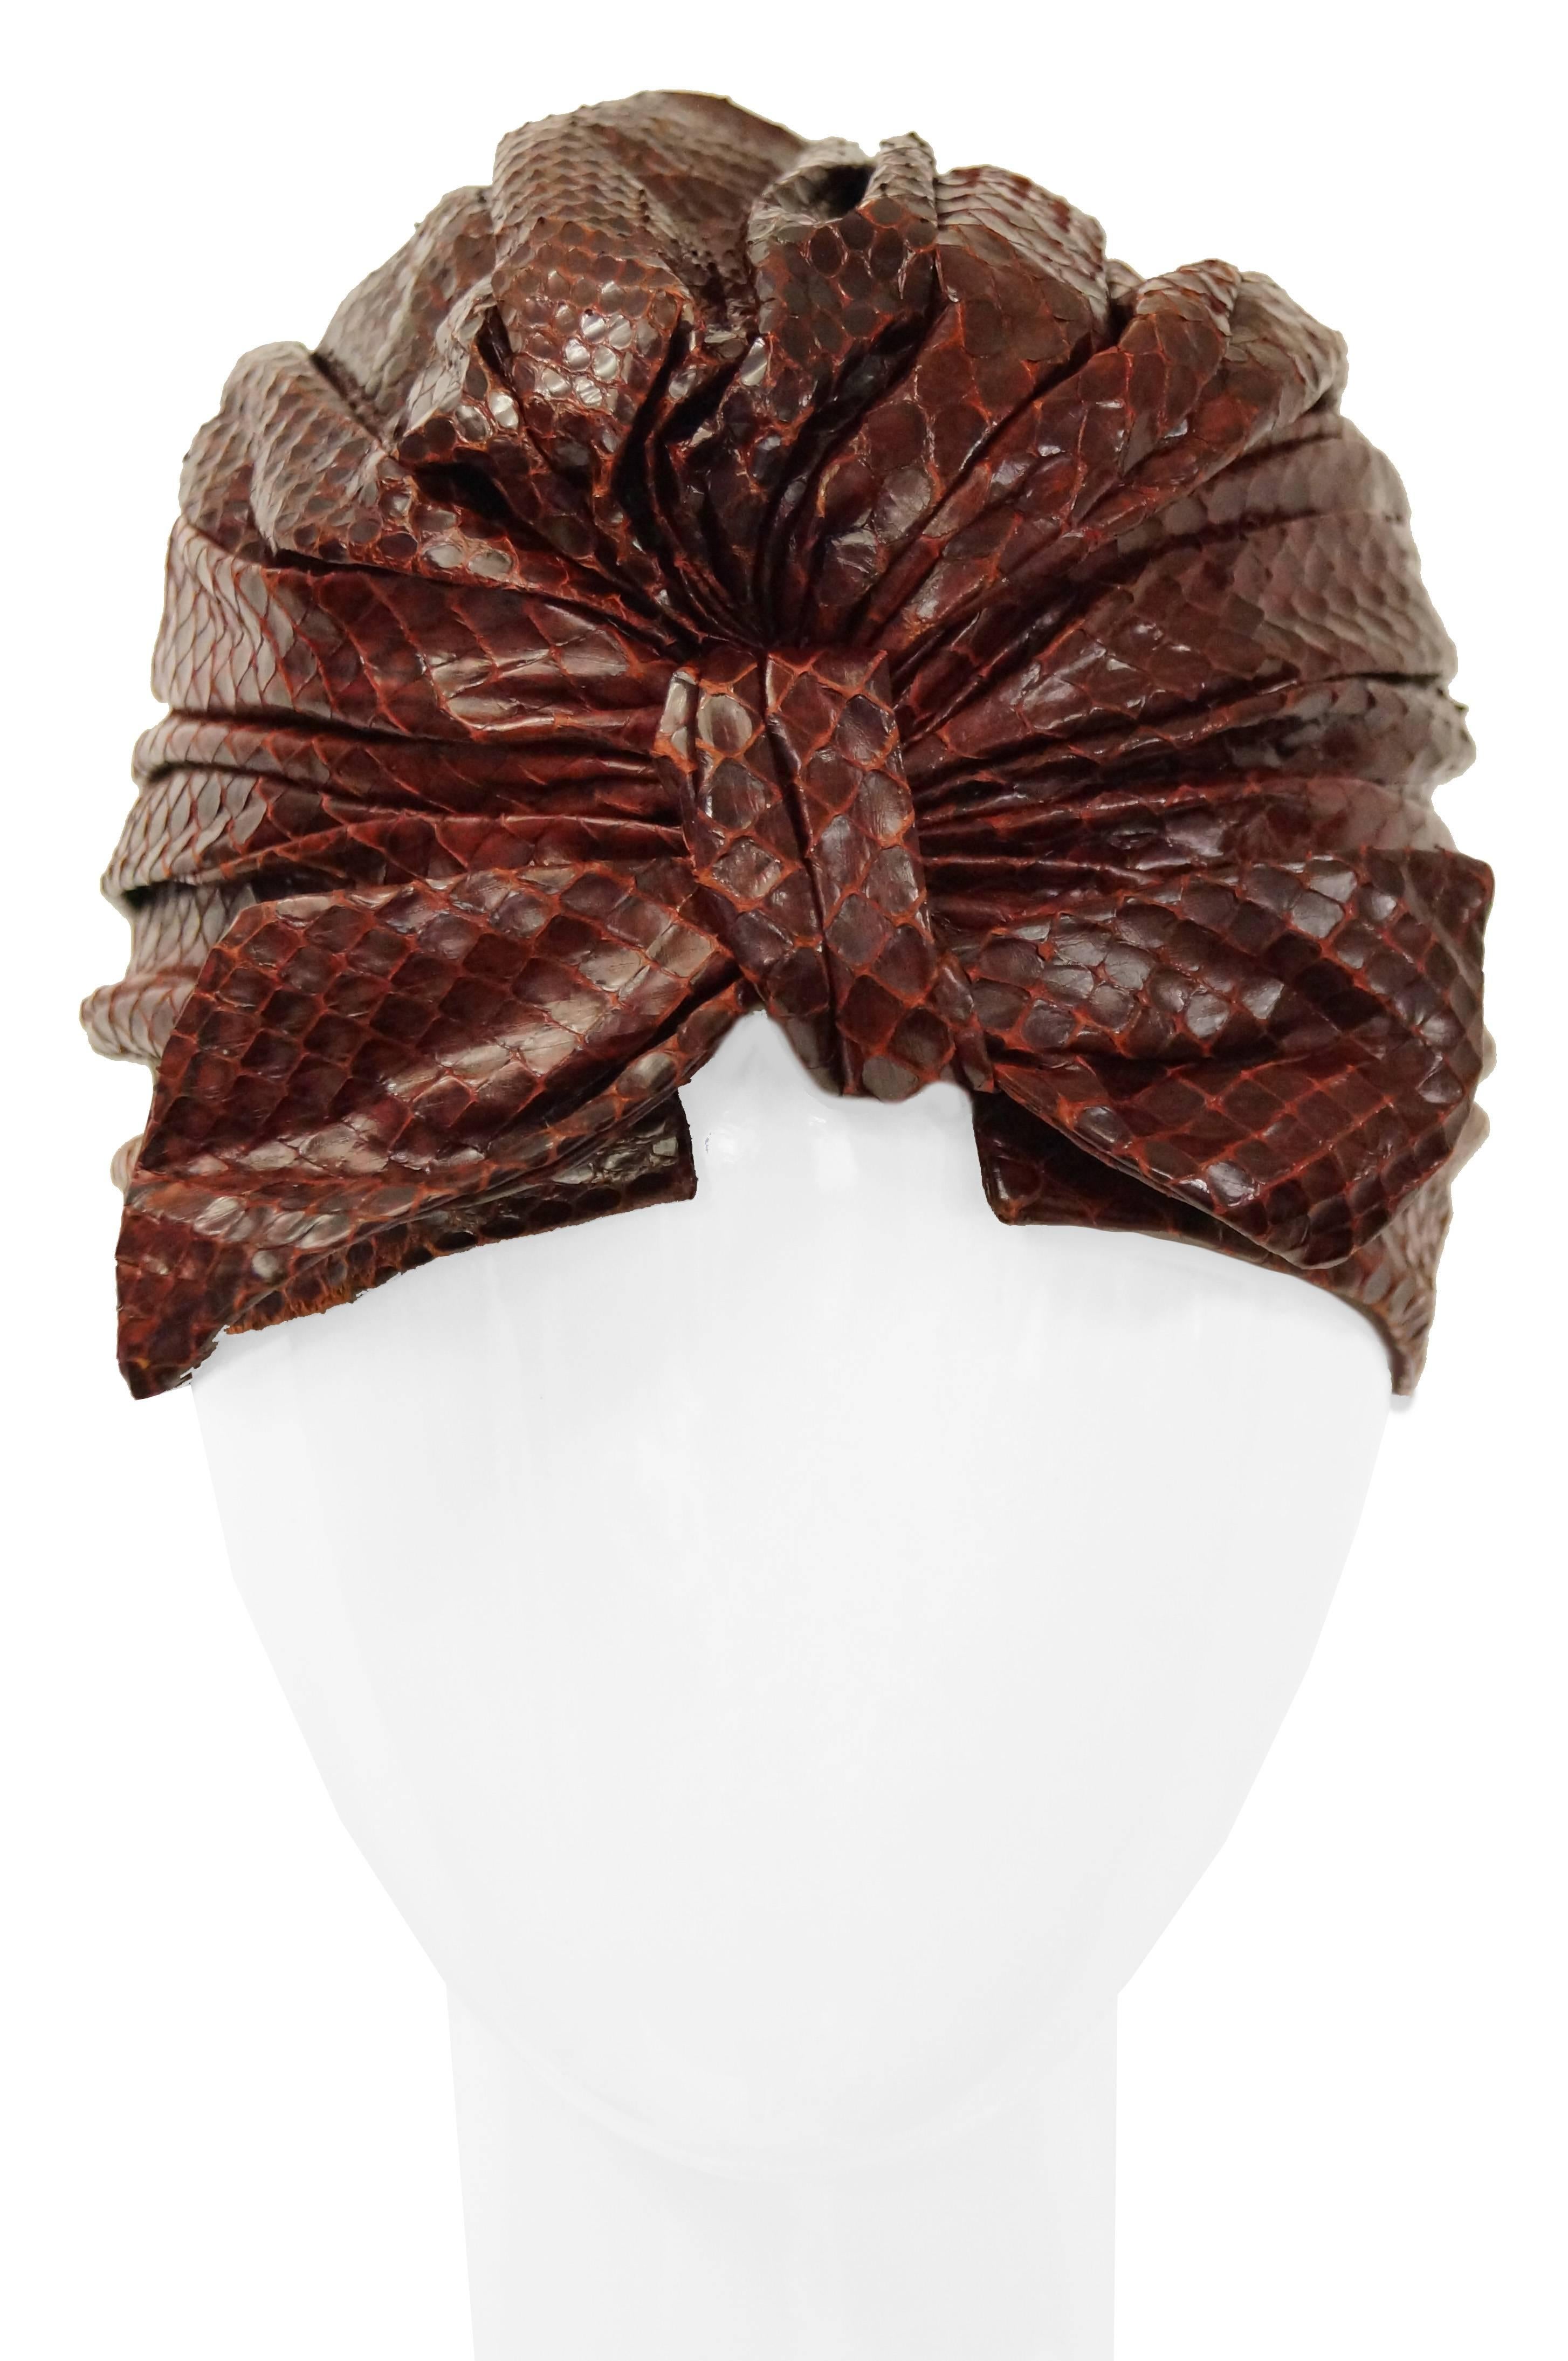 Absolutely gorgeous mid century sienna brown snakeskin turban "custom made" by the Neiman Marcus department store. The turban is made of ruched snakeskin and gathers in a bow at the back. The piece is rather versatile and can be worn